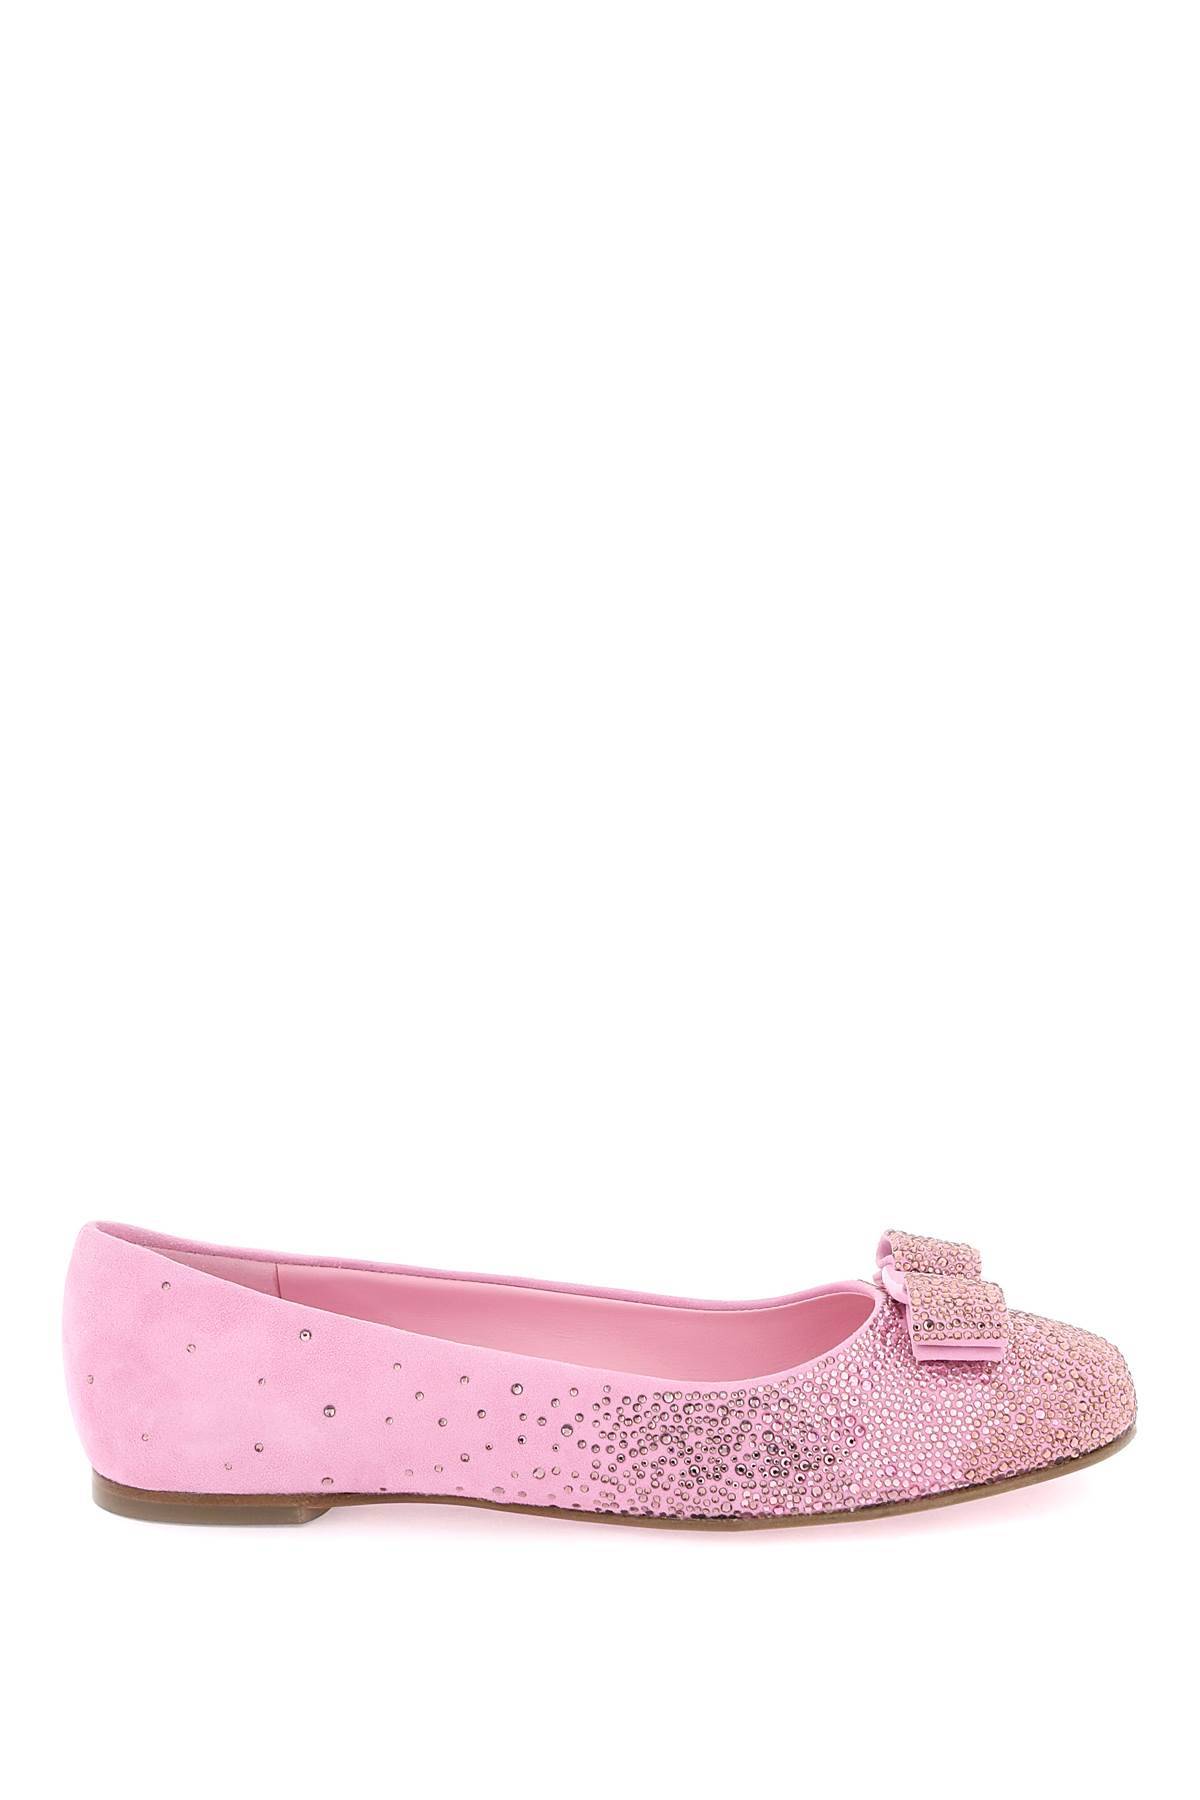 Ferragamo Ballerina Flats With Vara Bow And Crystals In Pink